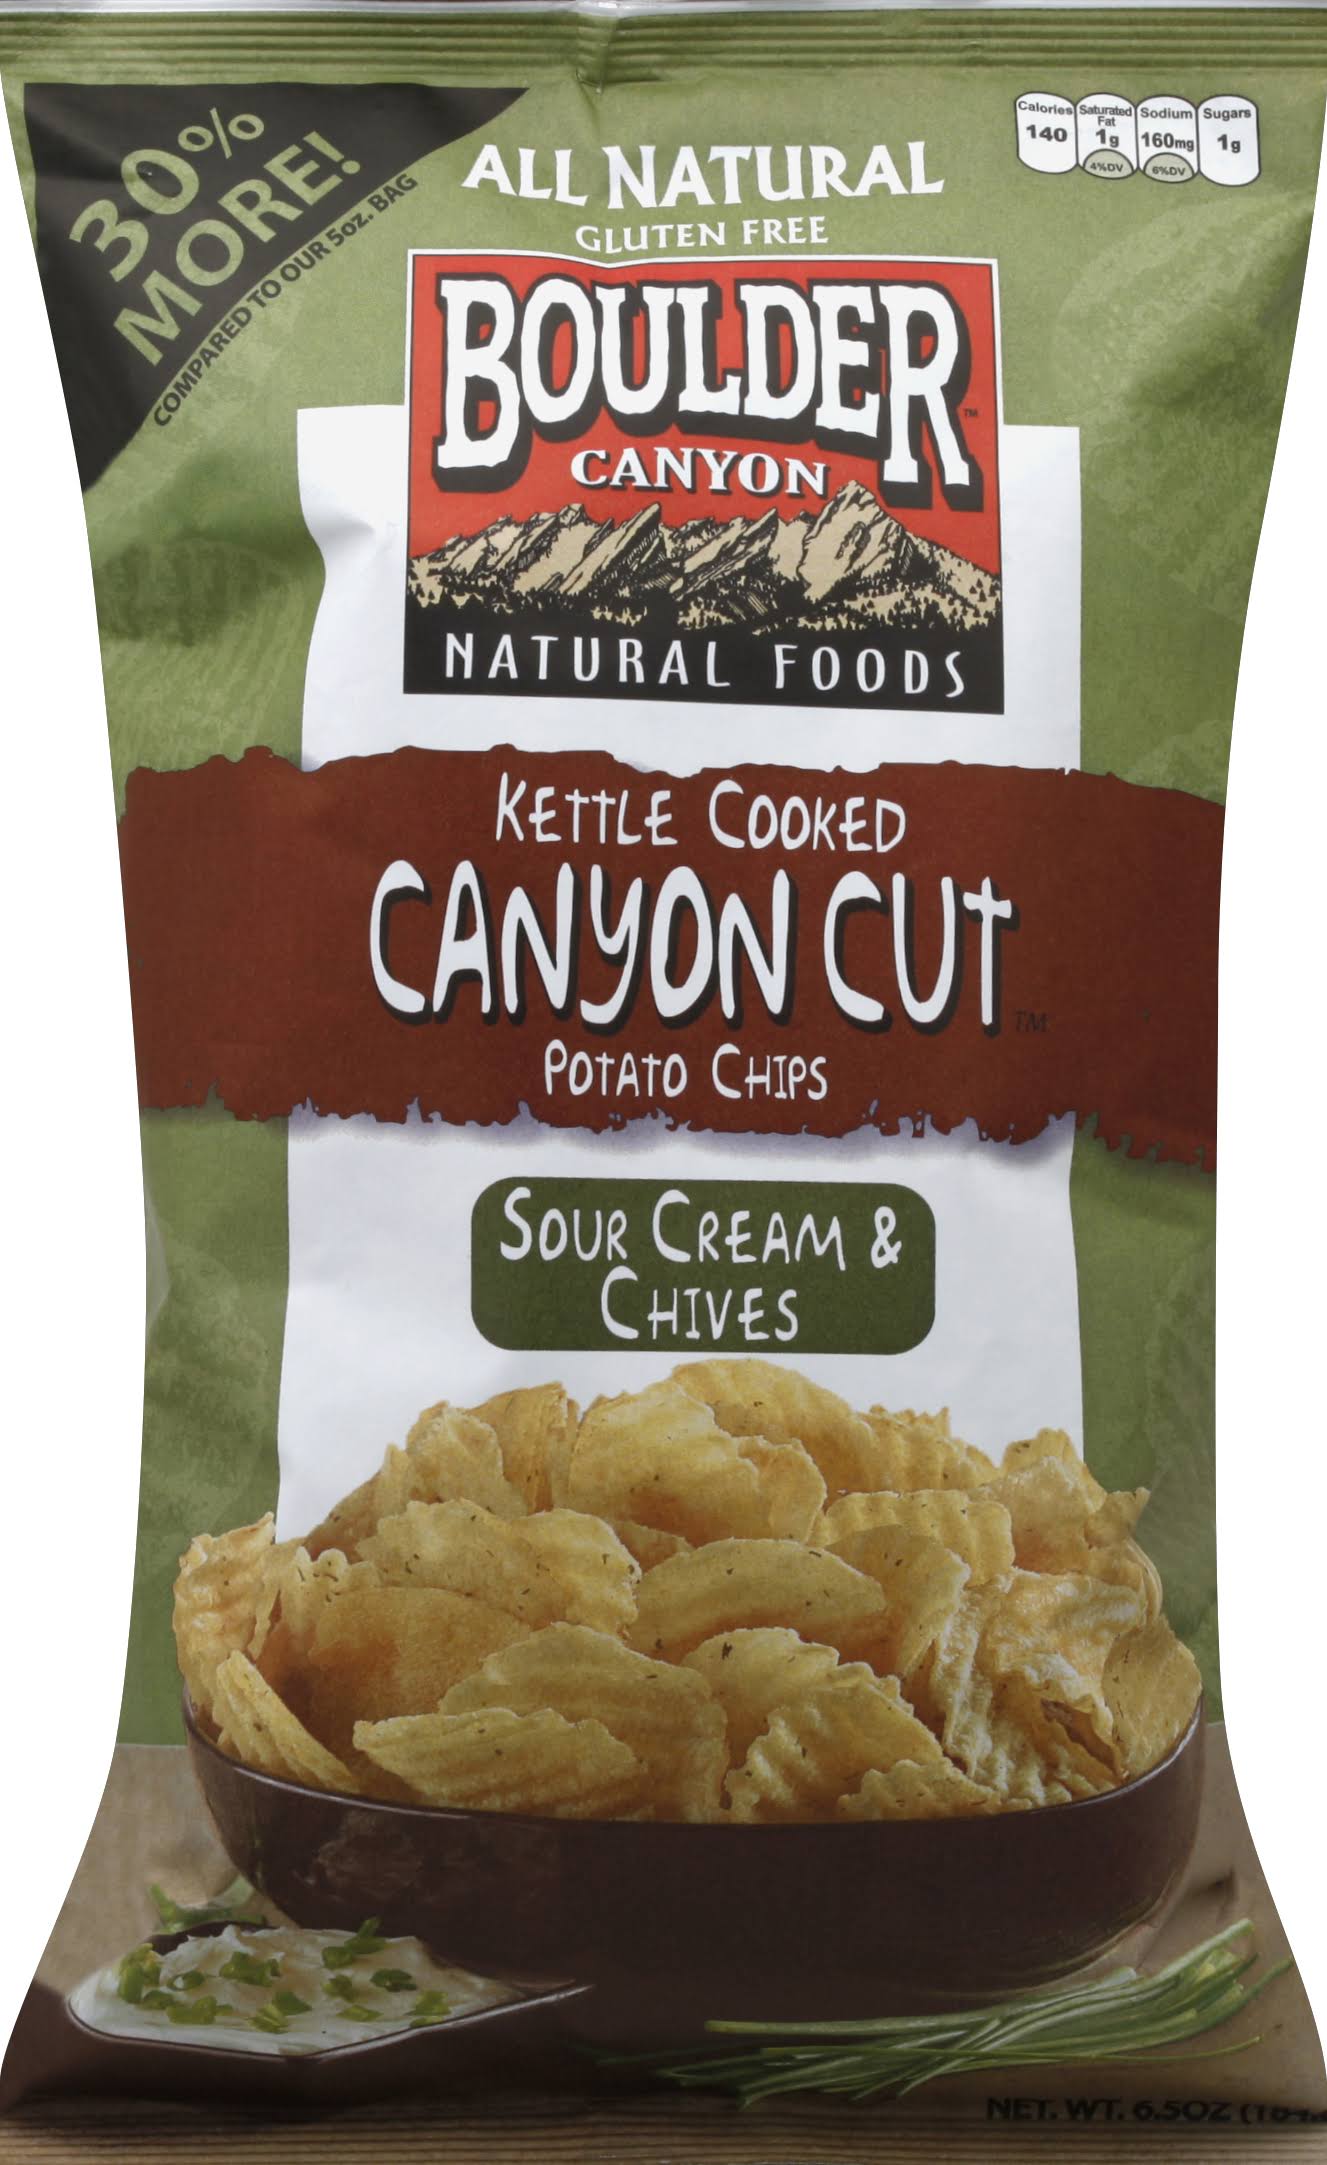 Boulder Canyon Cut Kettle Cooked Potato Chips - Sour Cream and Chives, 6.5oz